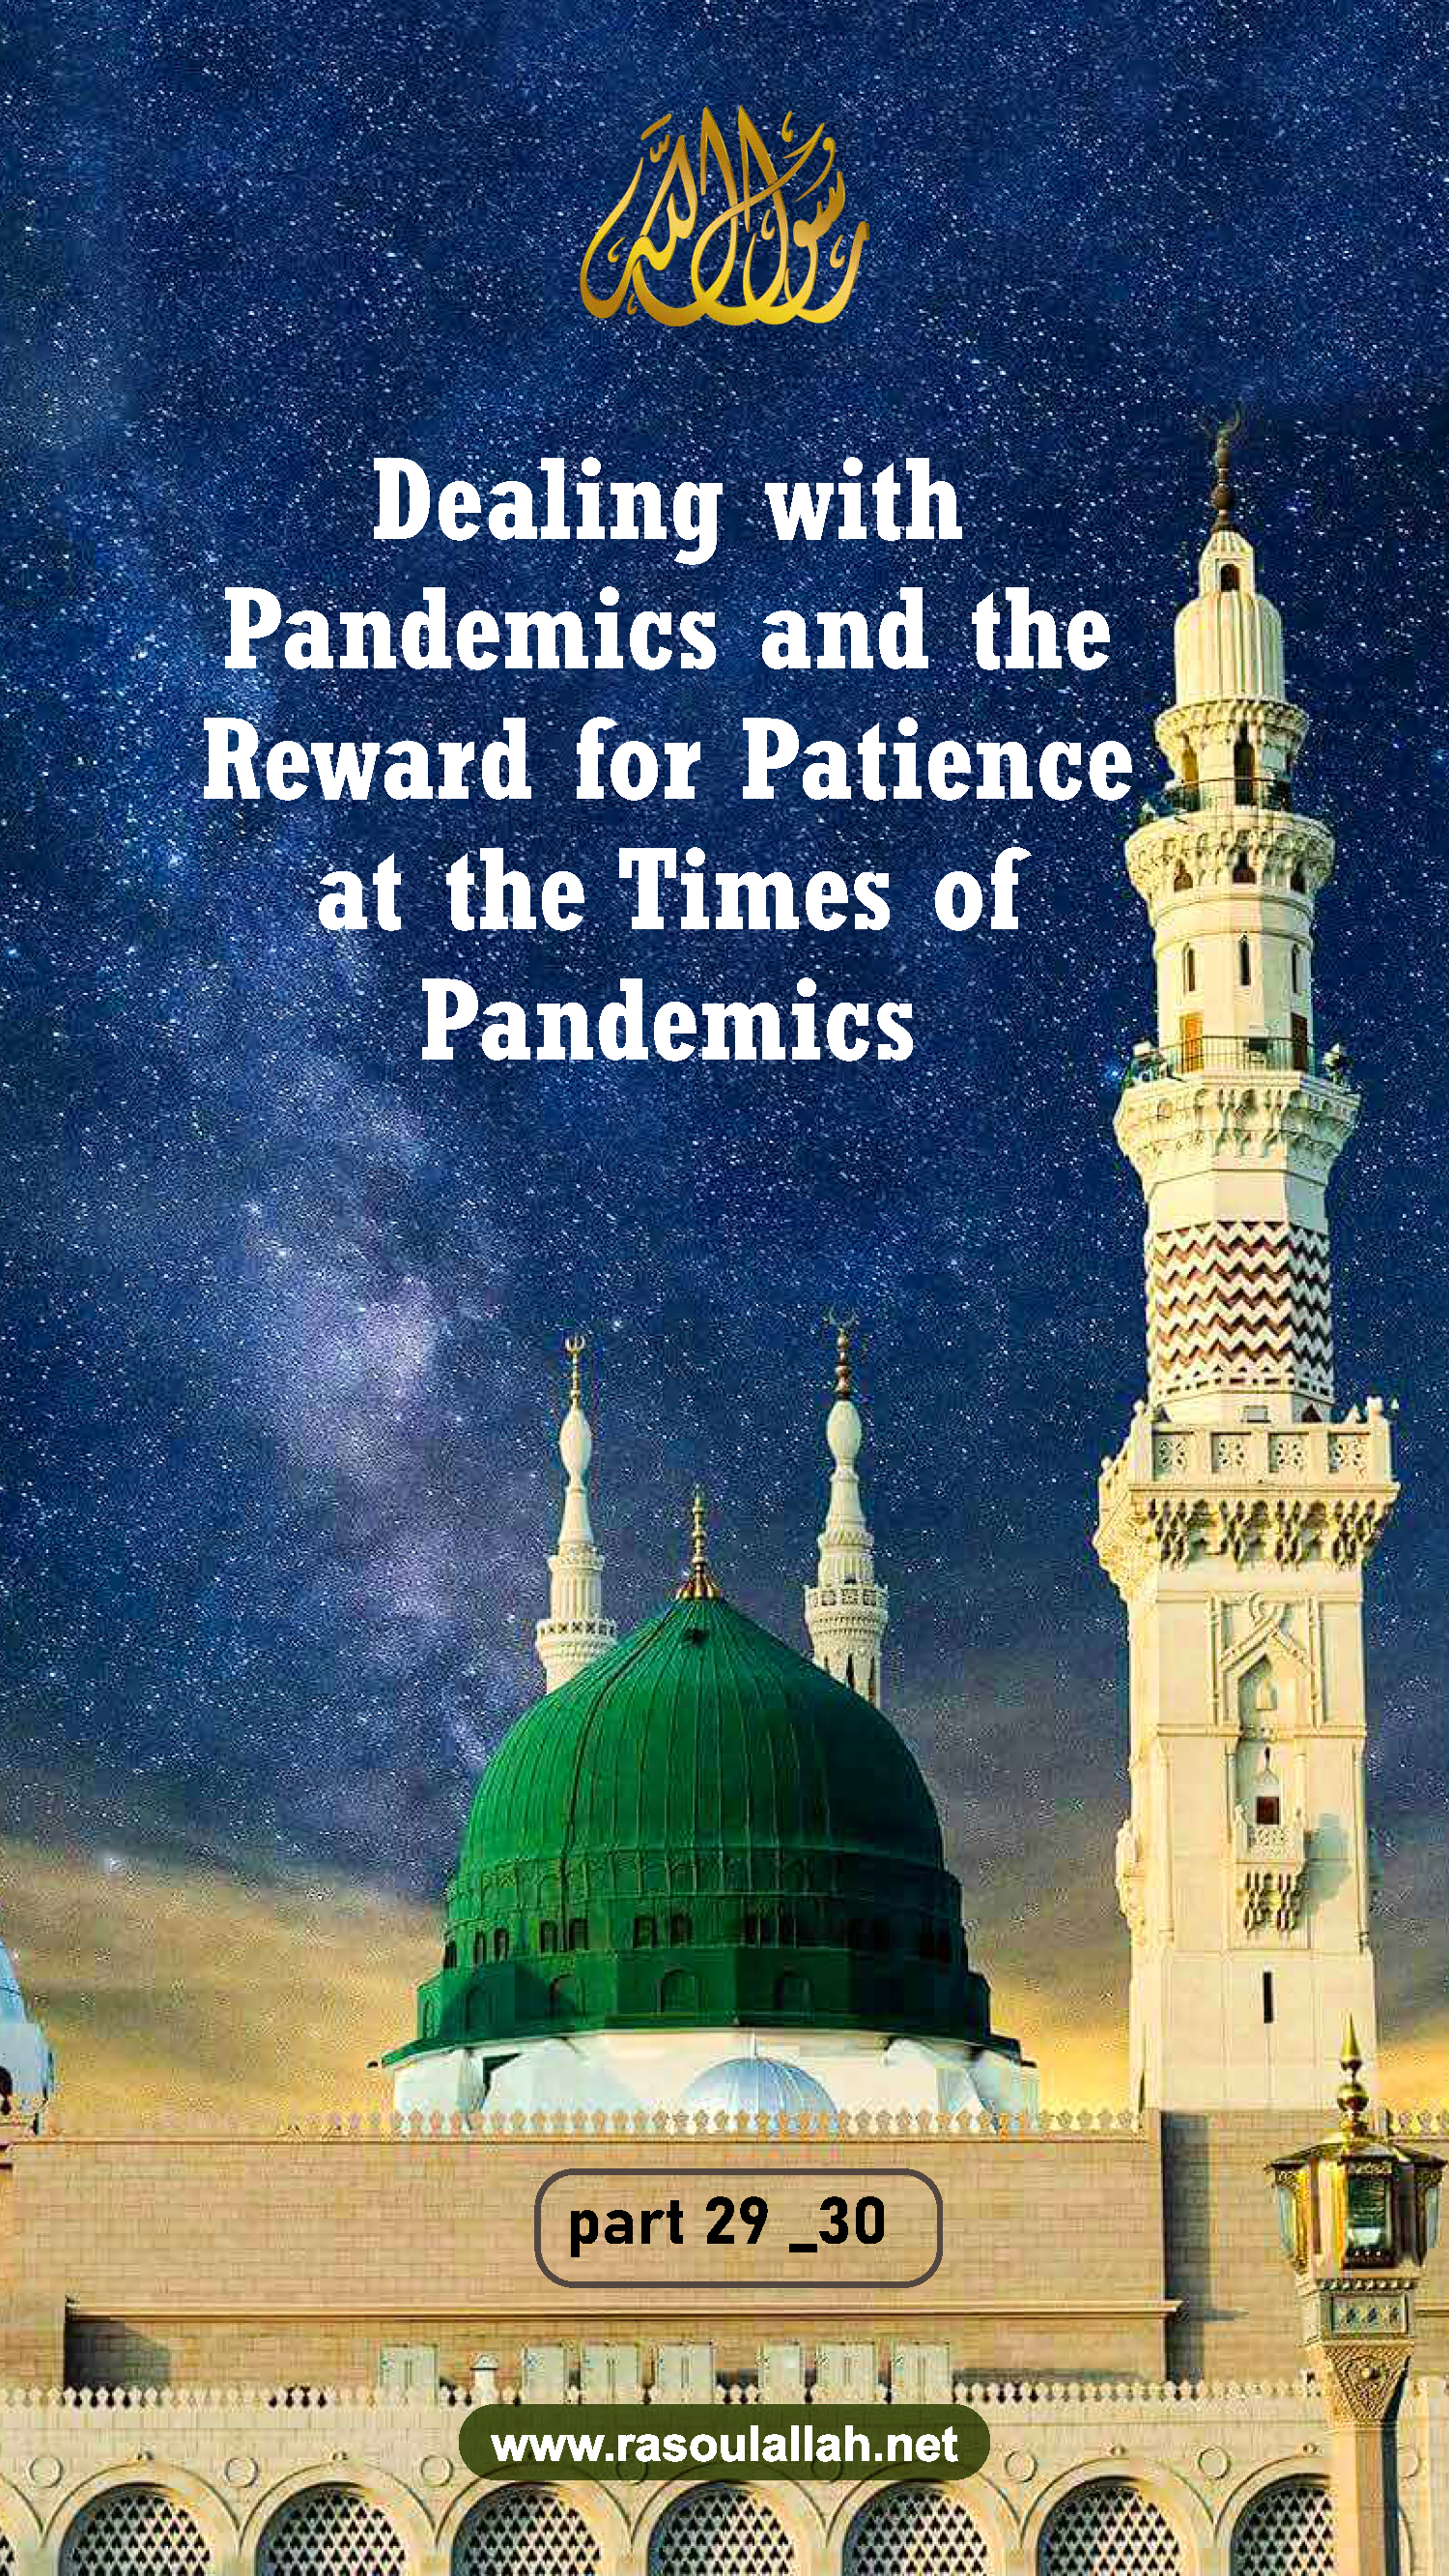 Hadith 29  Dealing with Pandemics and the Reward for Patience at the Times of Pandemics